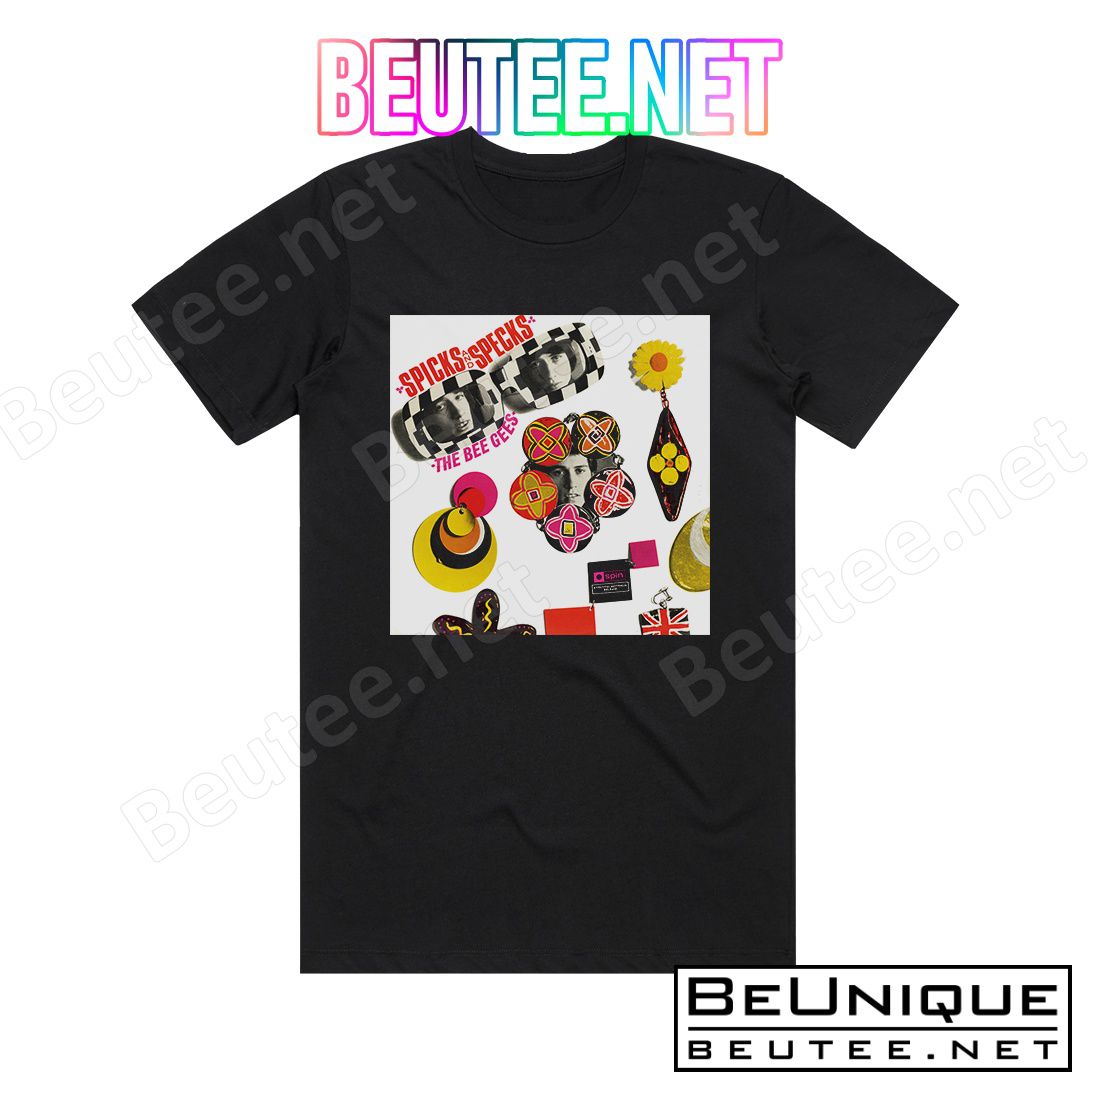 Bee Gees Spicks And Specks Album Cover T-Shirt